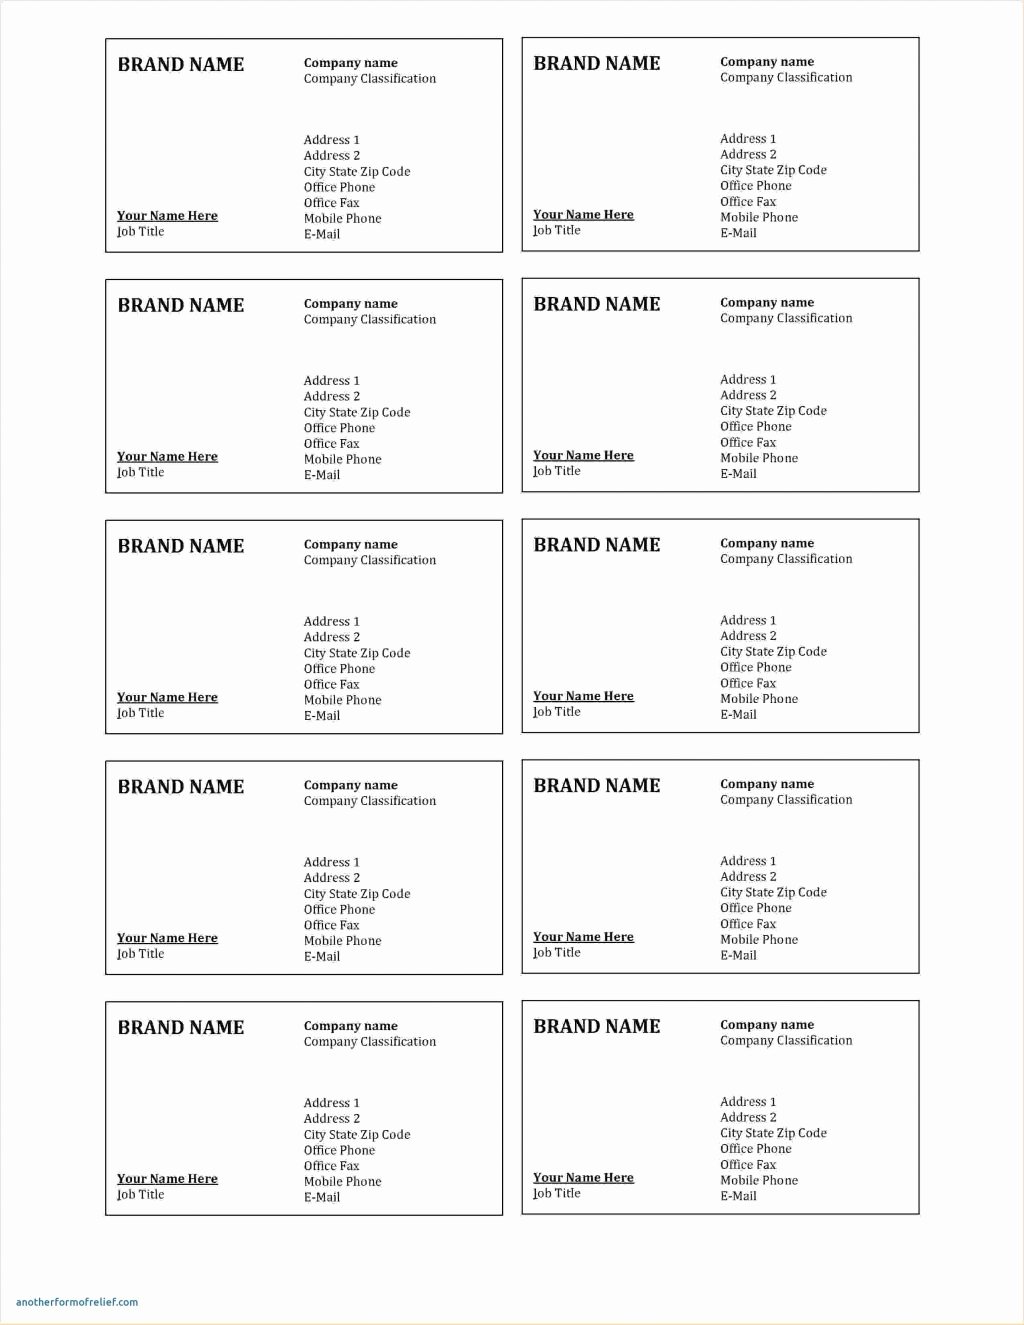 Fake Report Card Template Best Of Fake Report Card Template School Templates High format